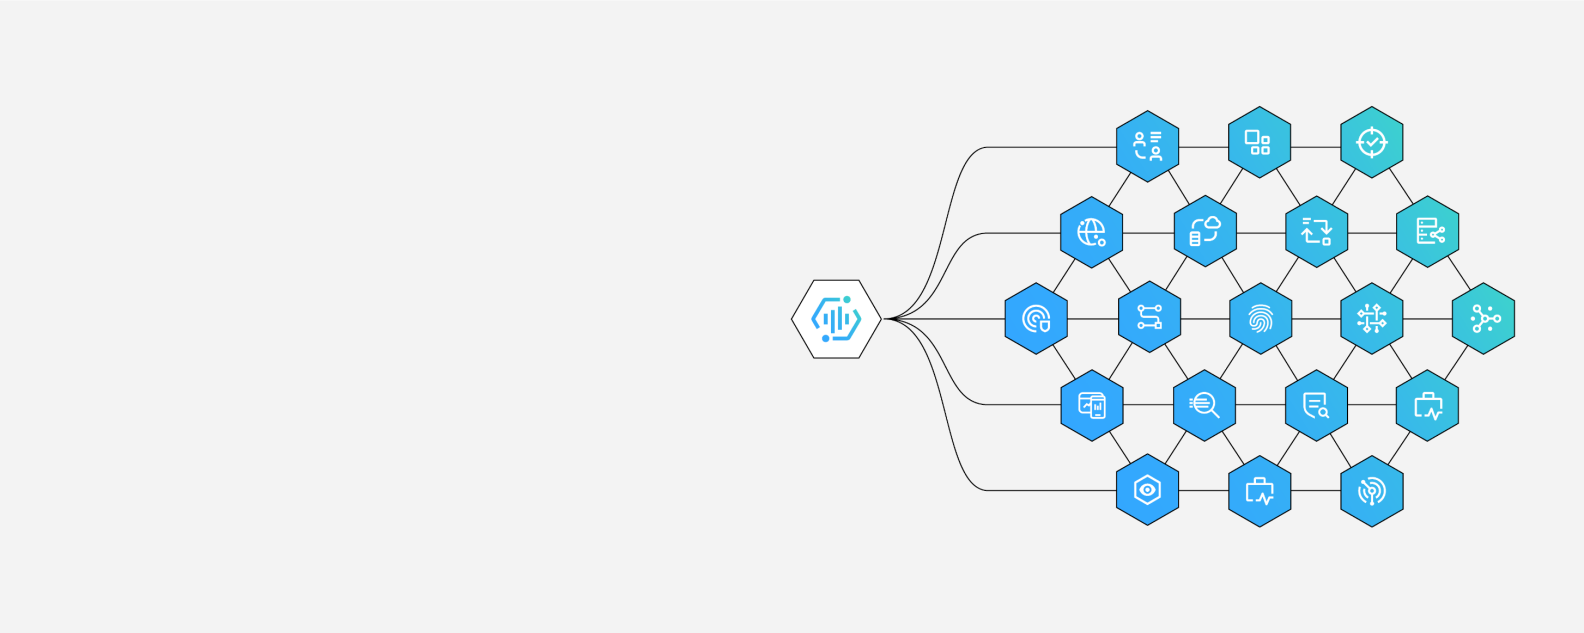 Interconnected hexagon representing a network of servers connected to the cloud being assisted by Instana's observability platform